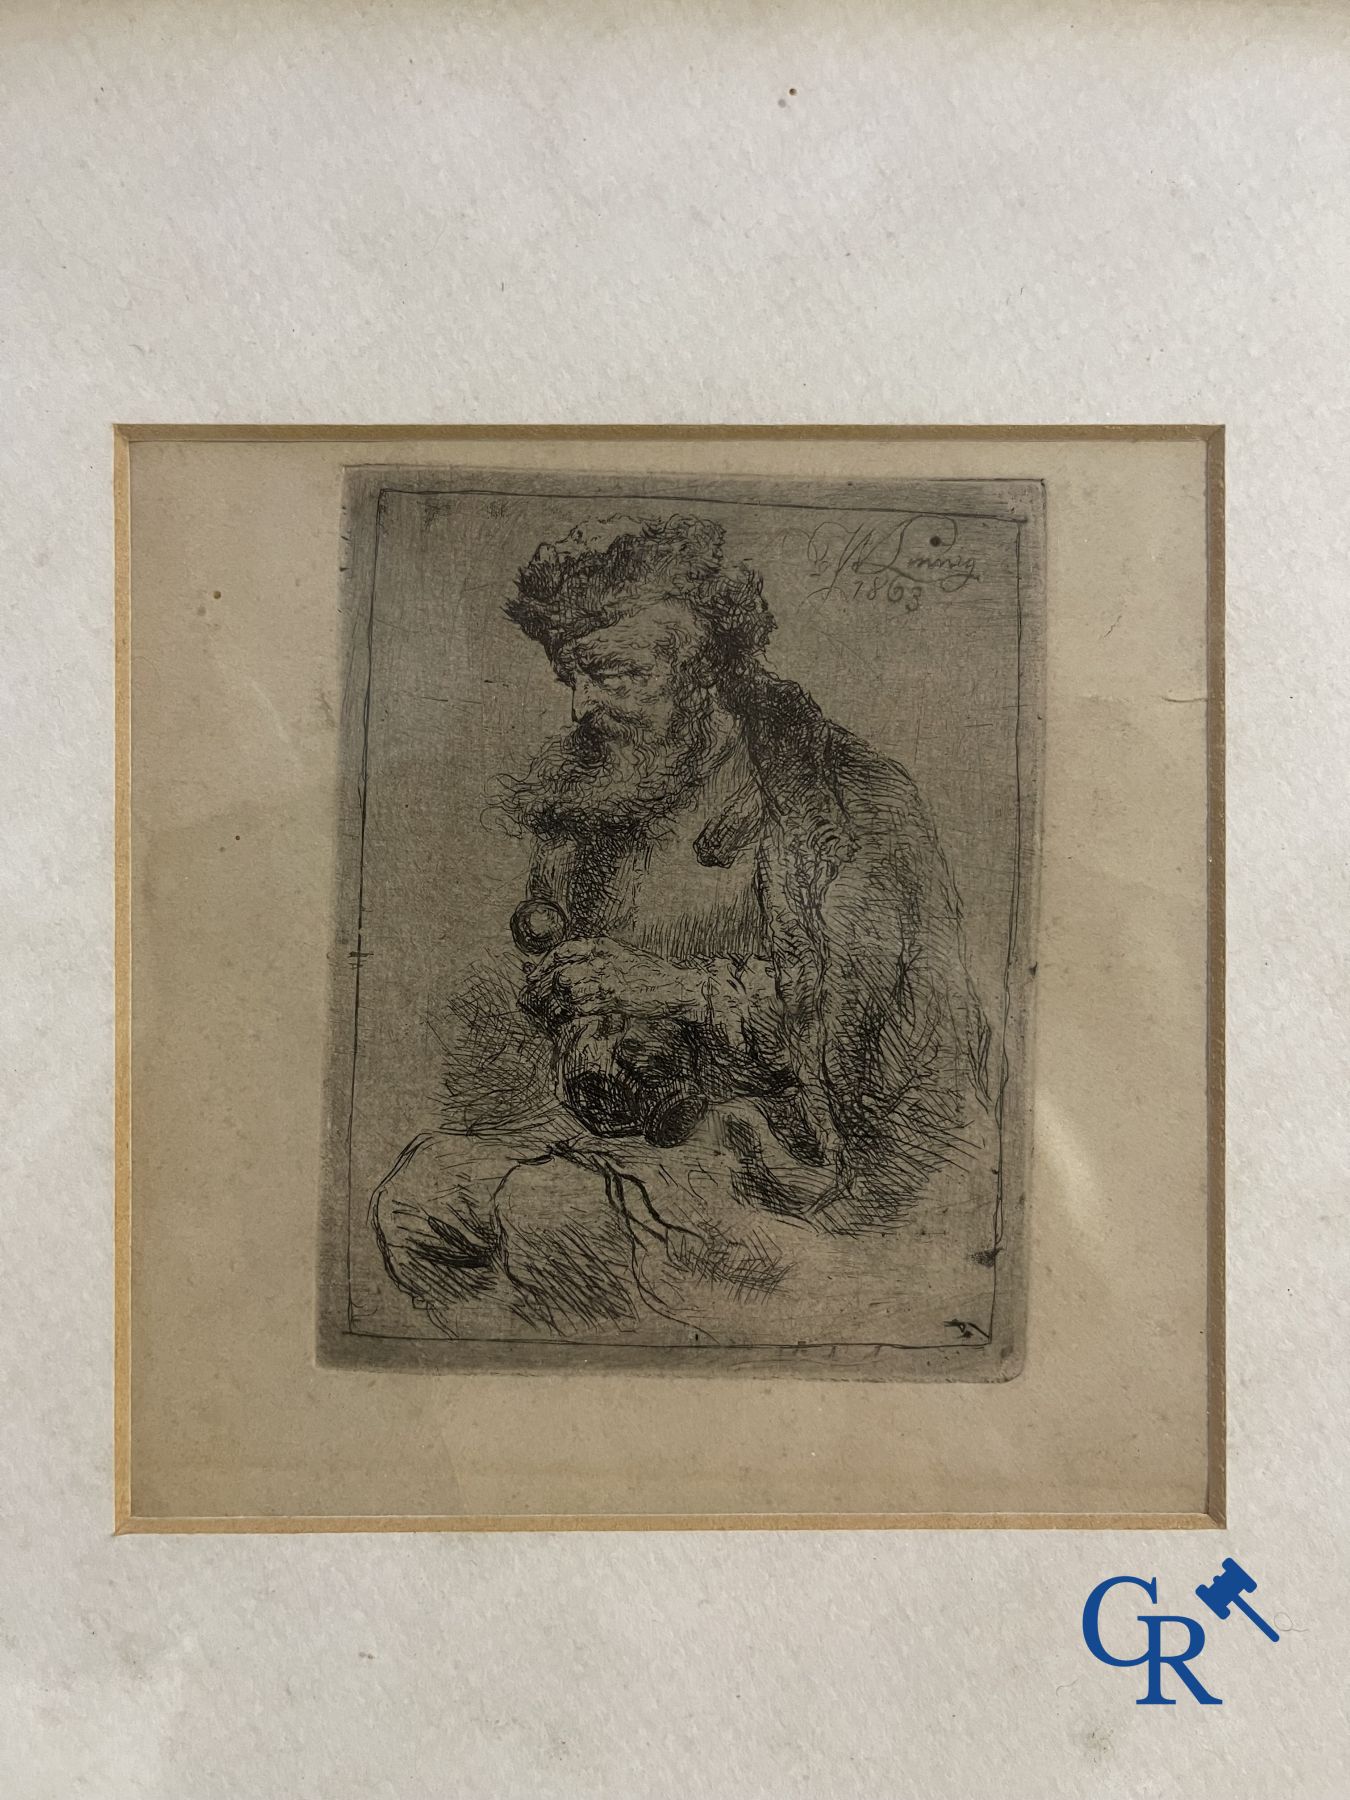 Interesting lot of 2 antique engravings, a sketch and an etching by W. Linnig. - Image 15 of 16